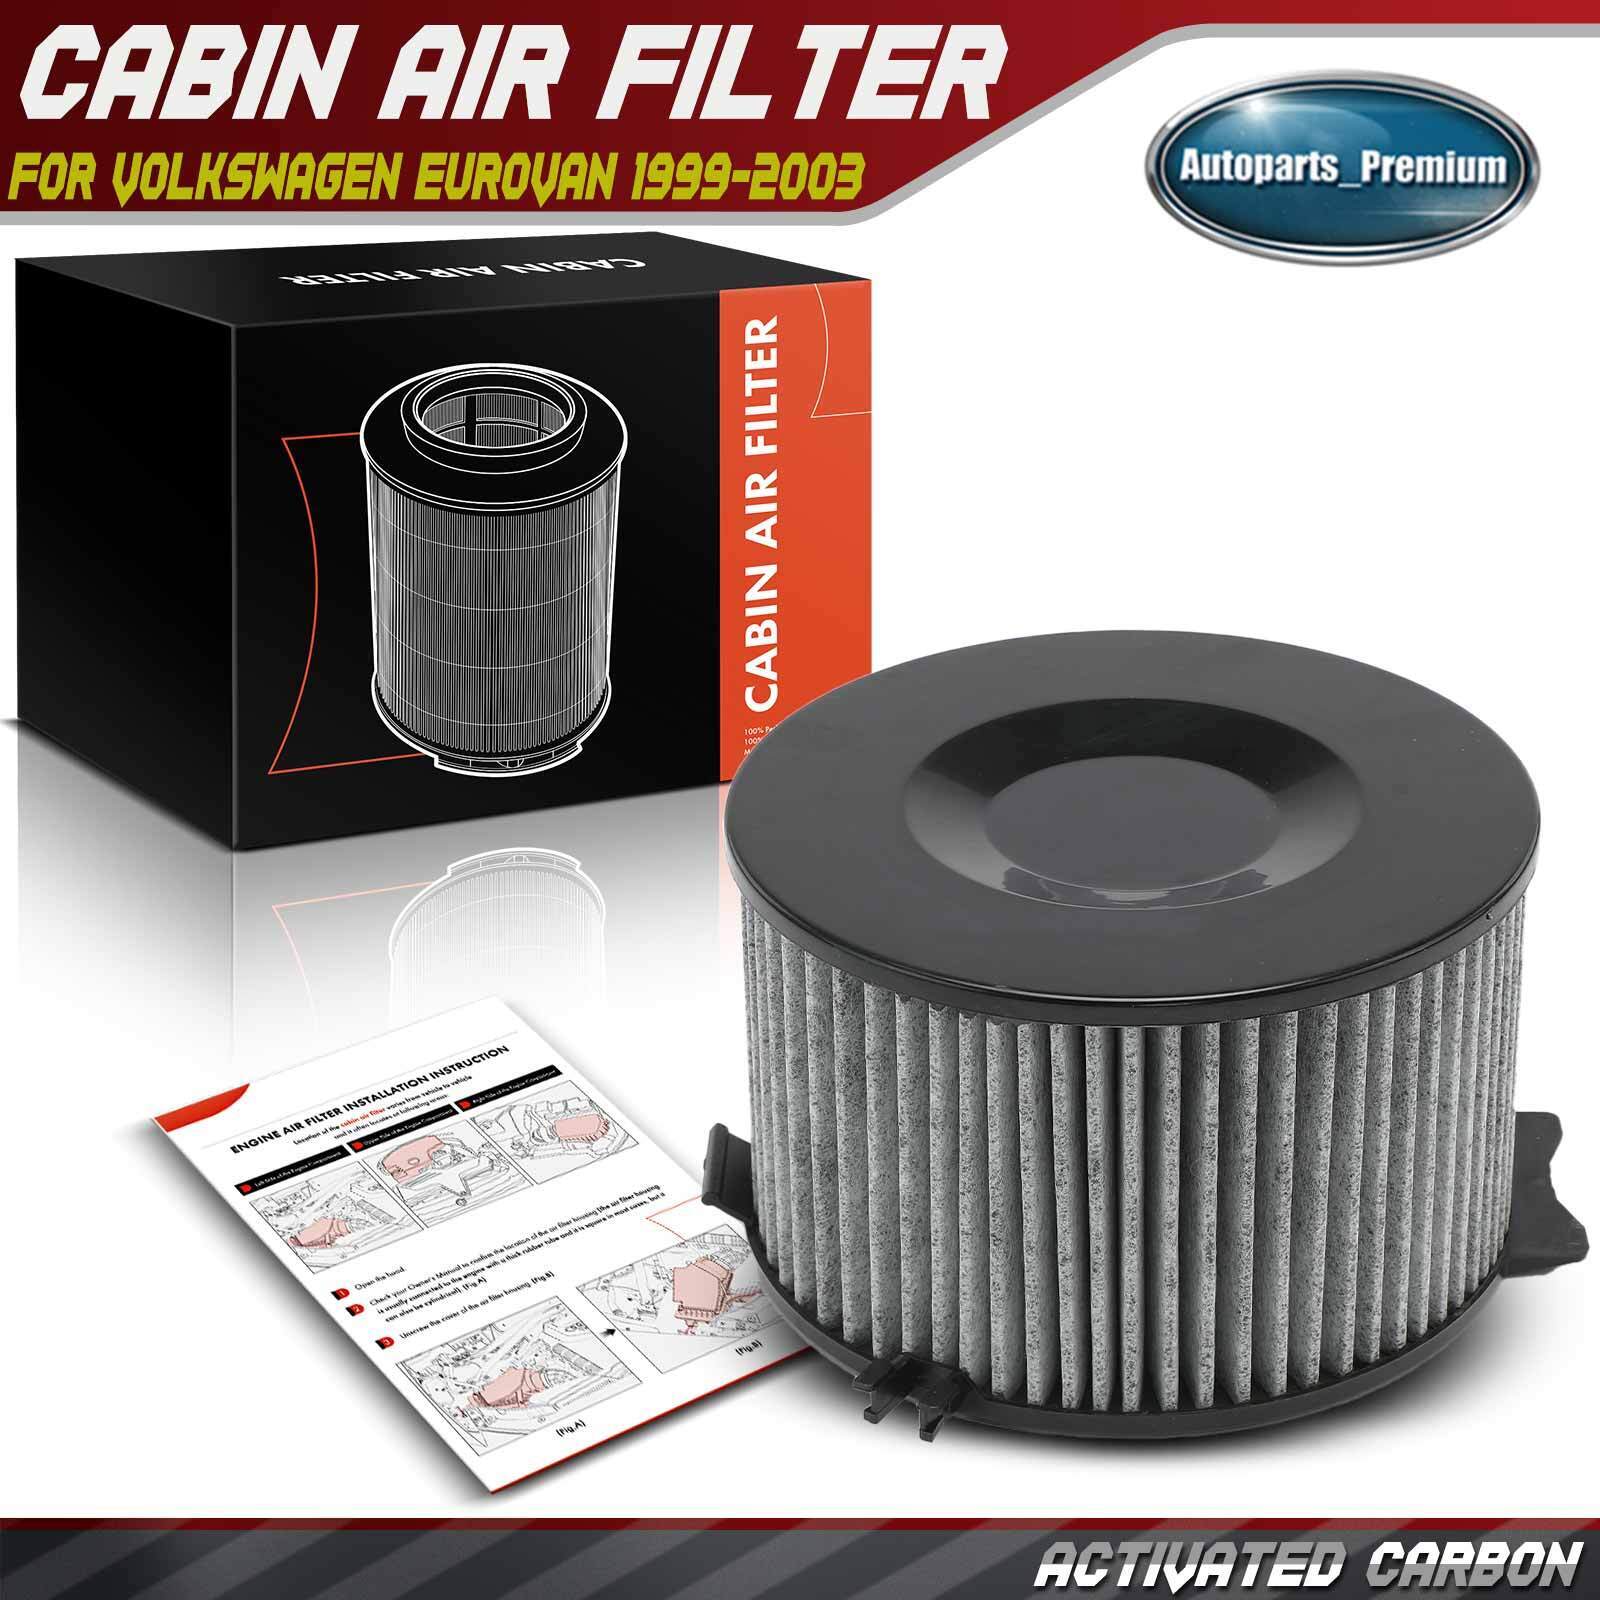 New Activated Carbon Cabin Air Filter for Volkswagen EuroVan 1999-2003 2.5L 2.8L